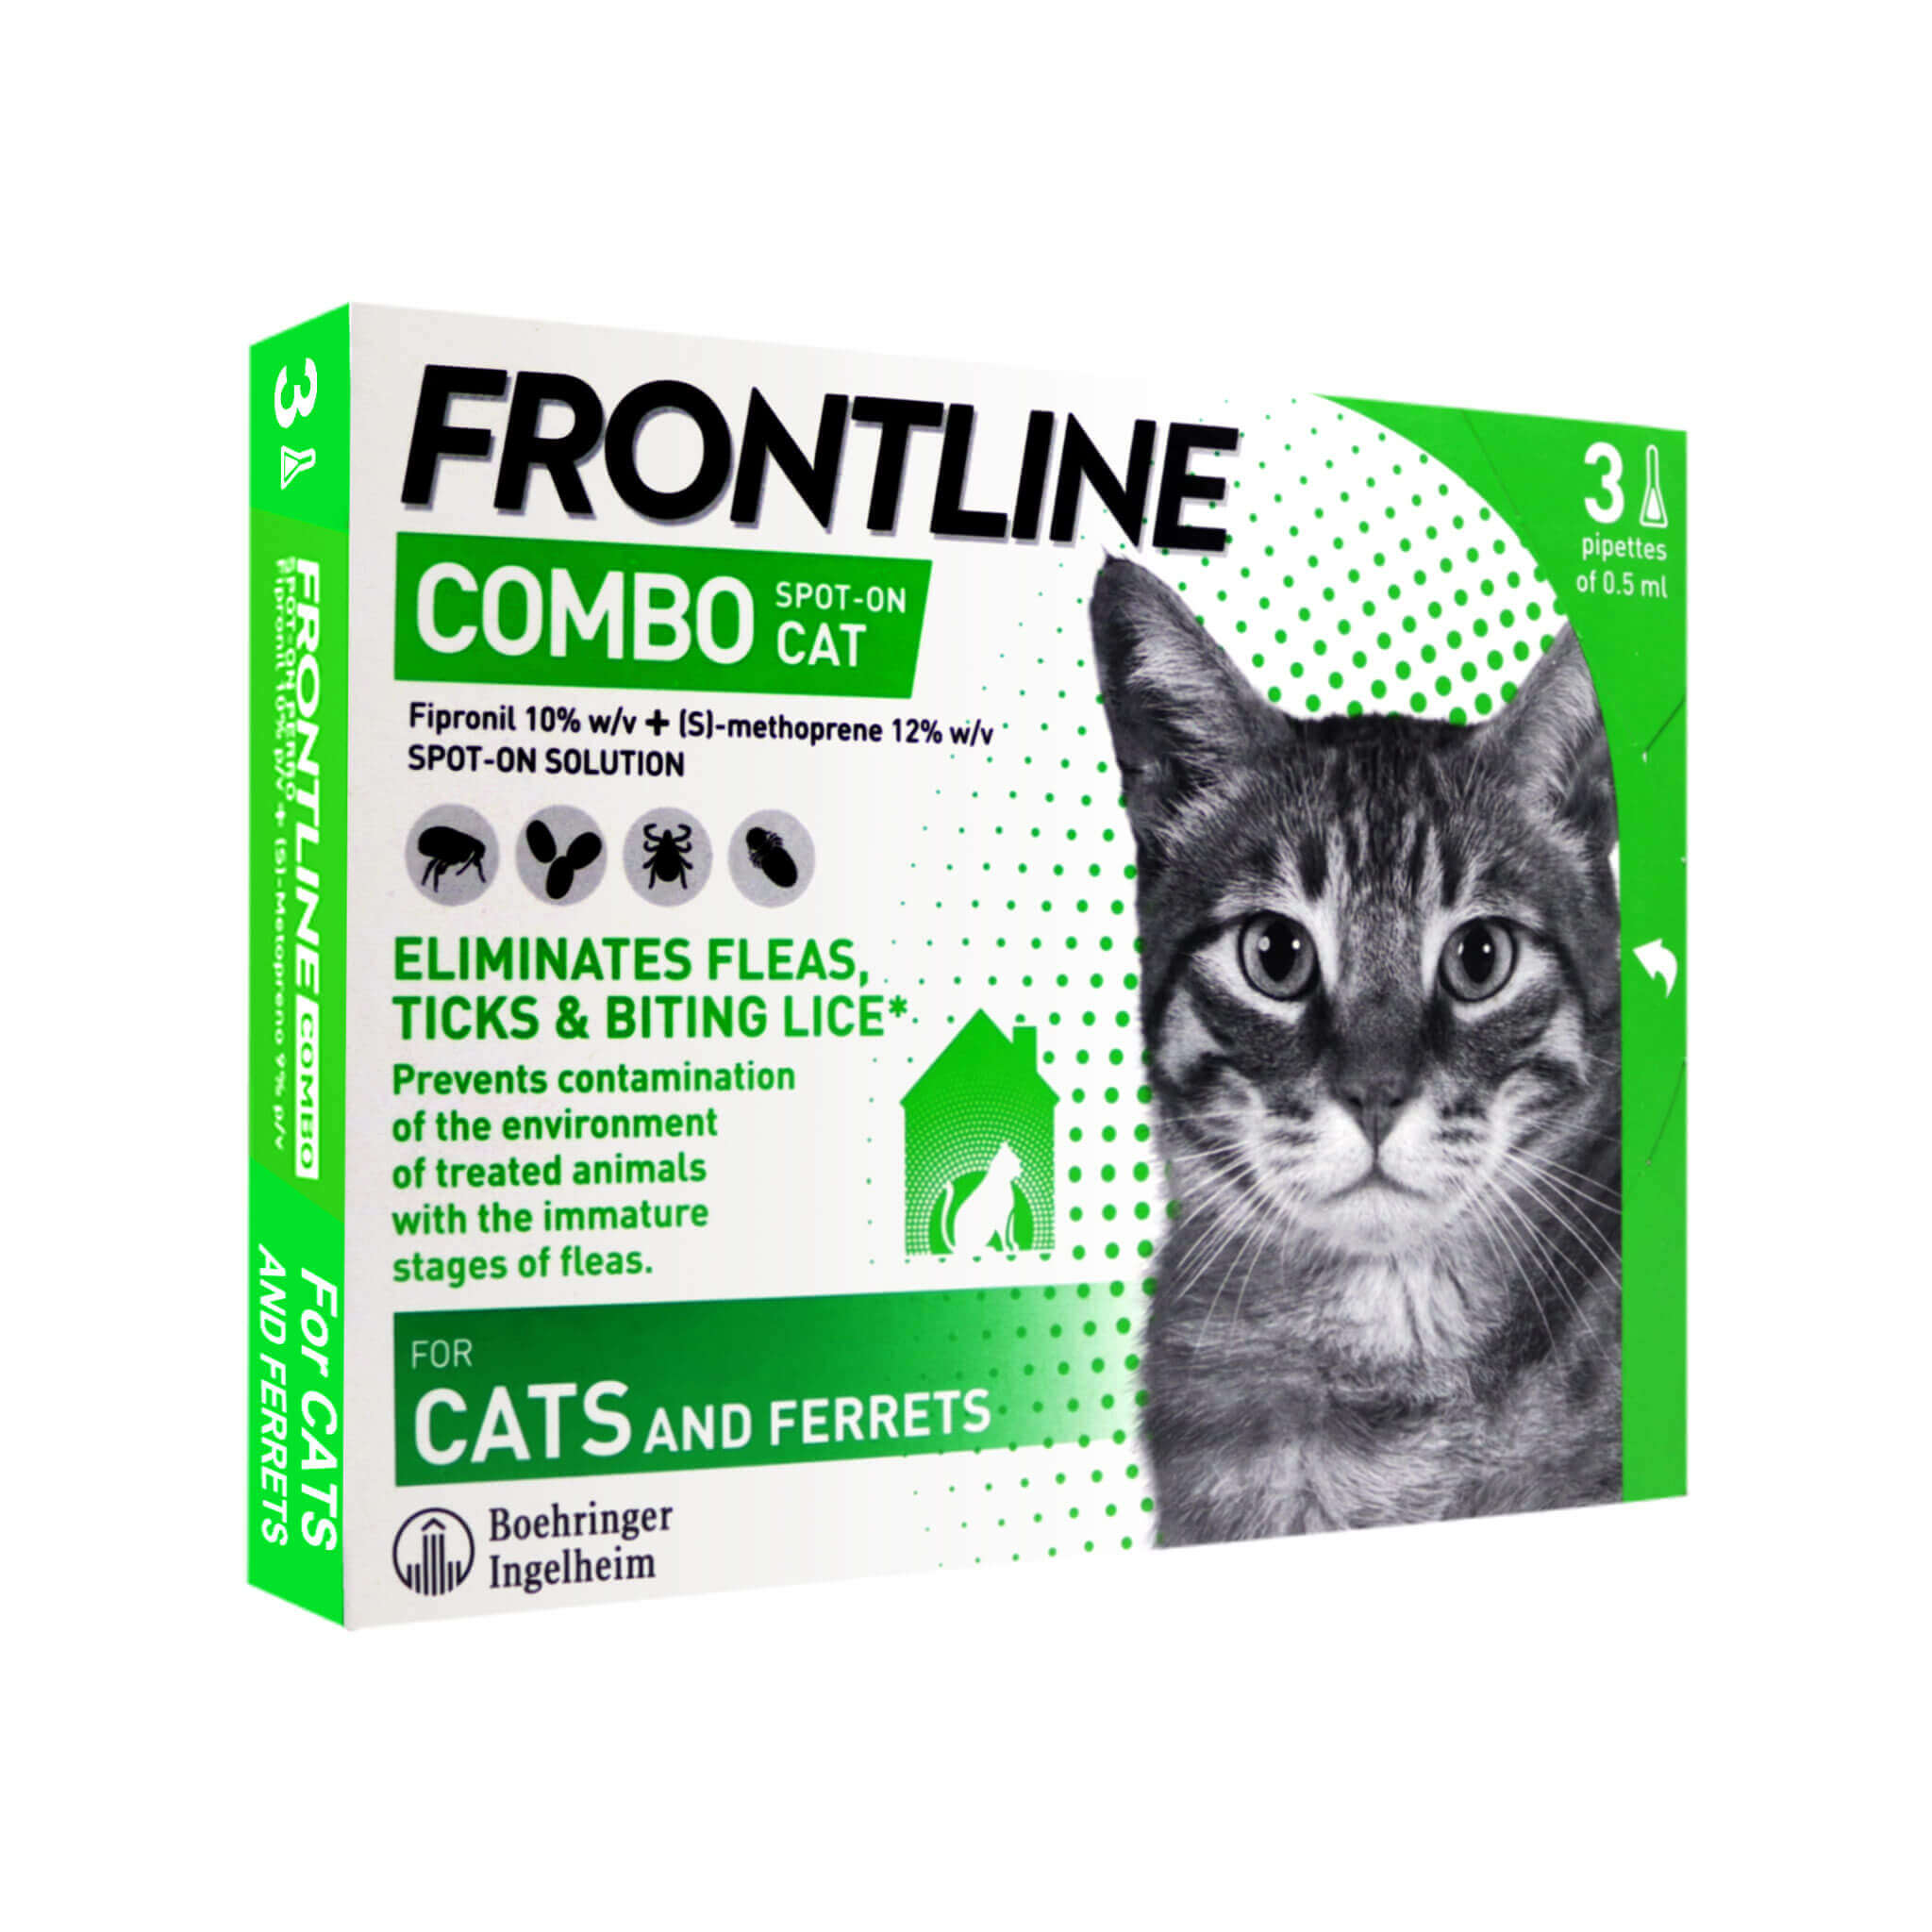 Frontline-cate